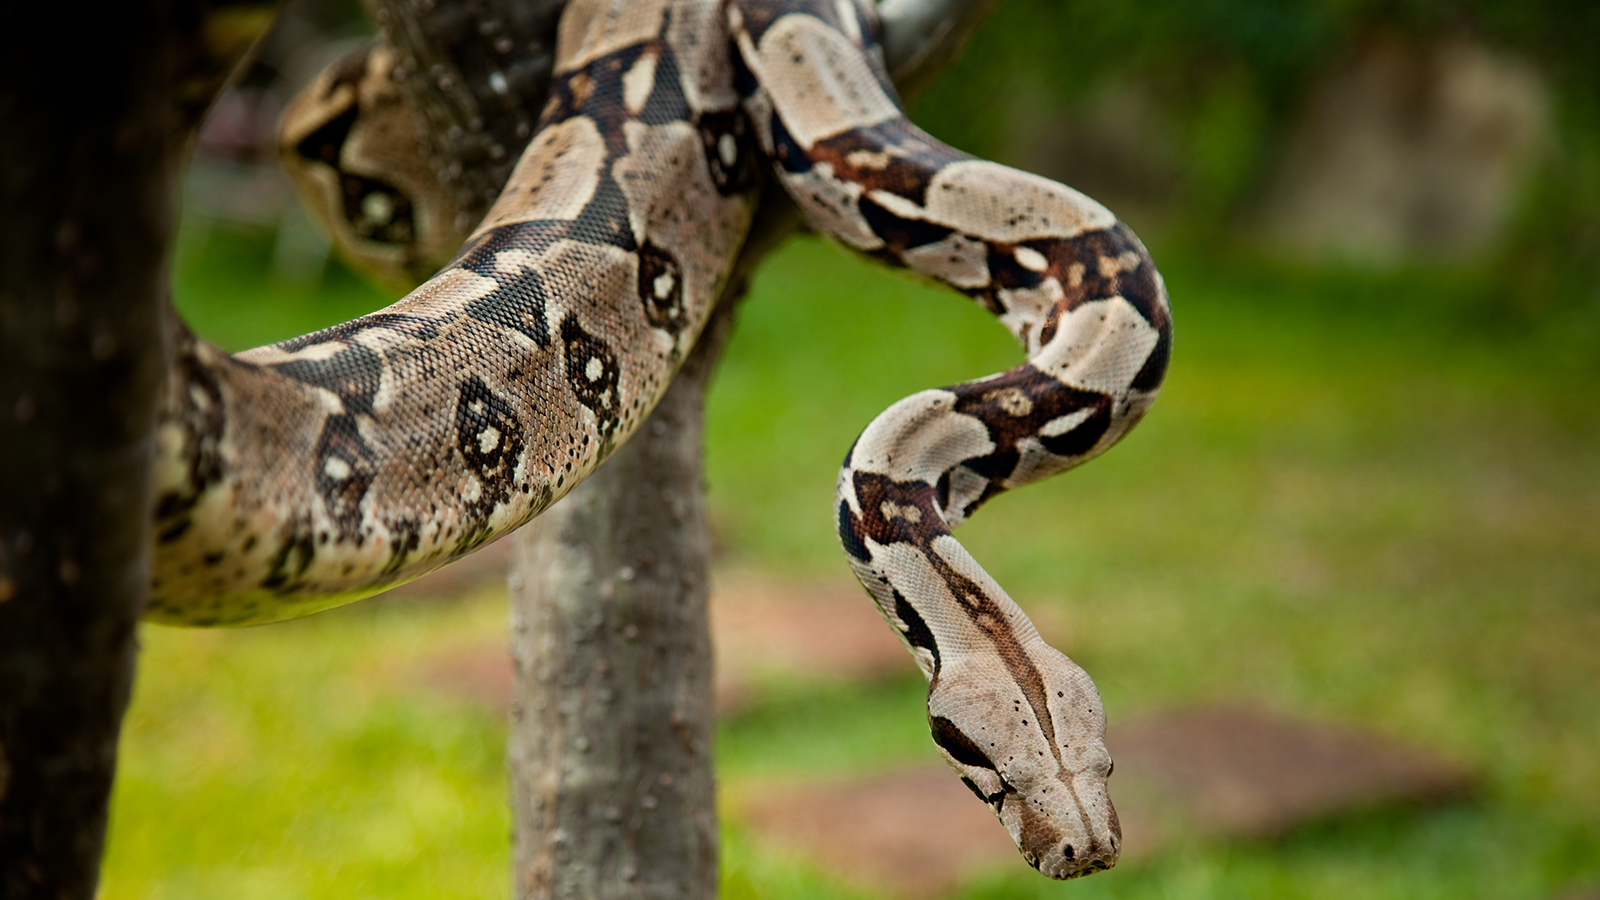 red tailed boa constrictor